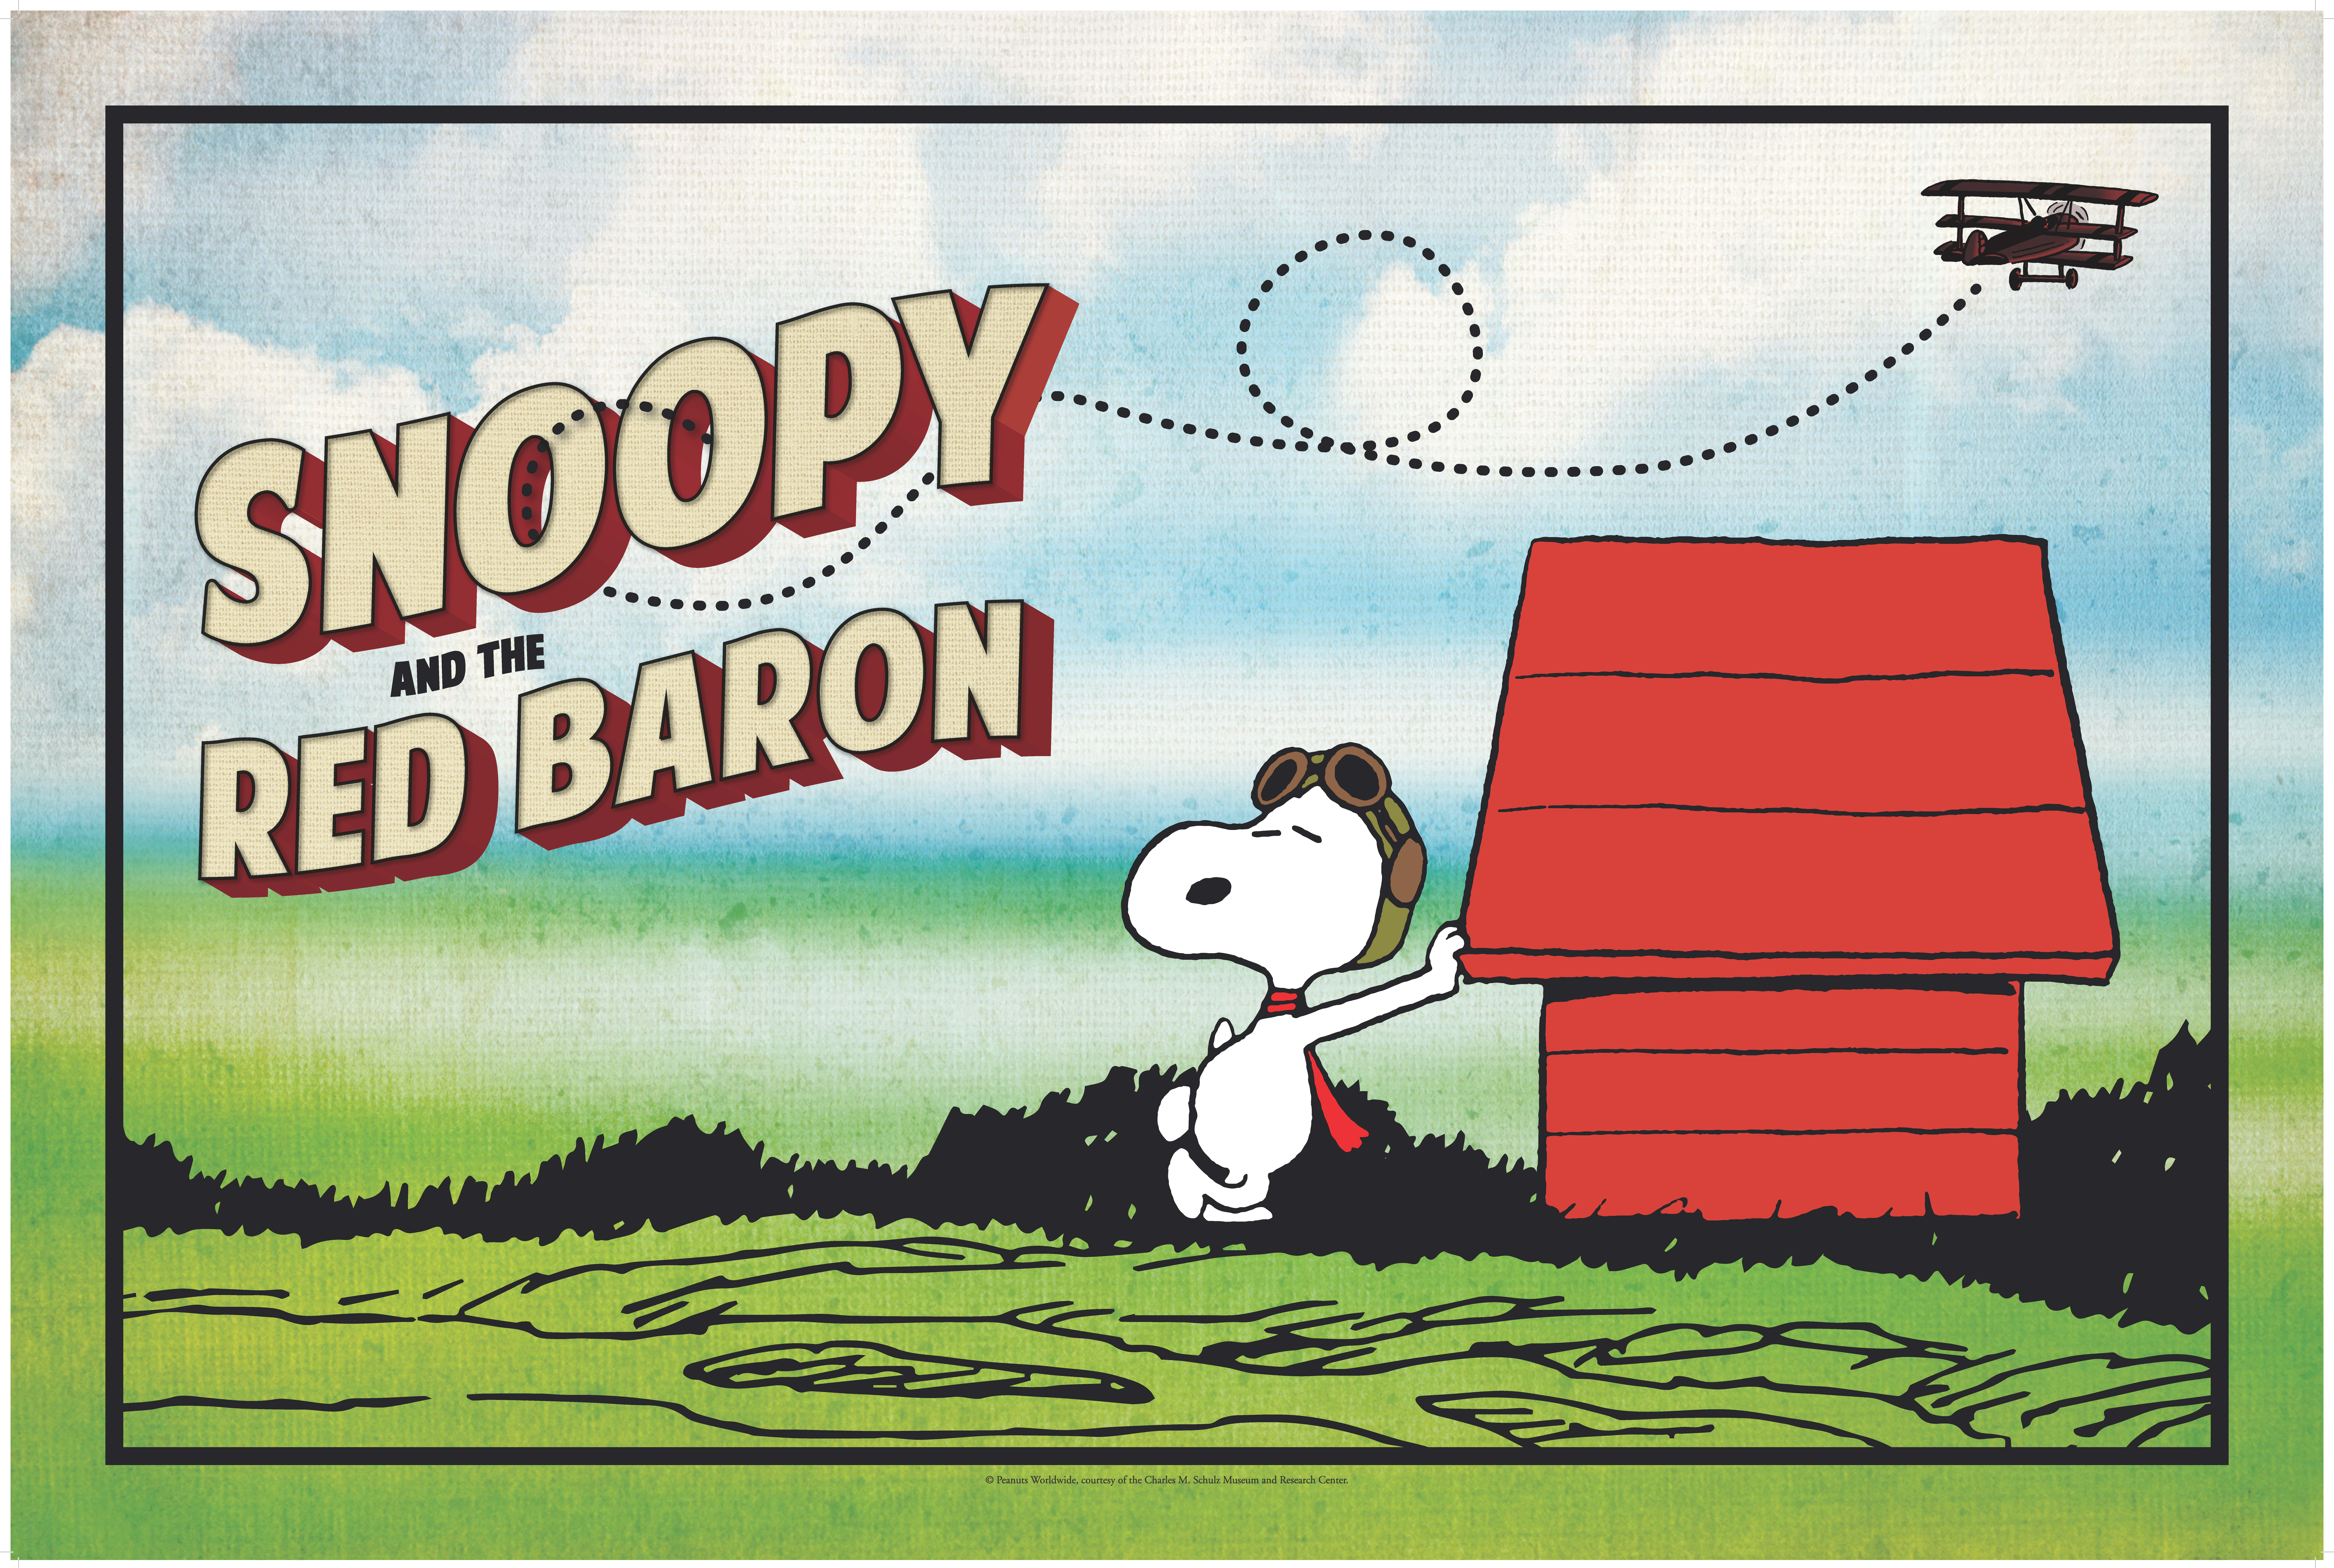 New Exhibit Opening: Snoopy and the Red Baron